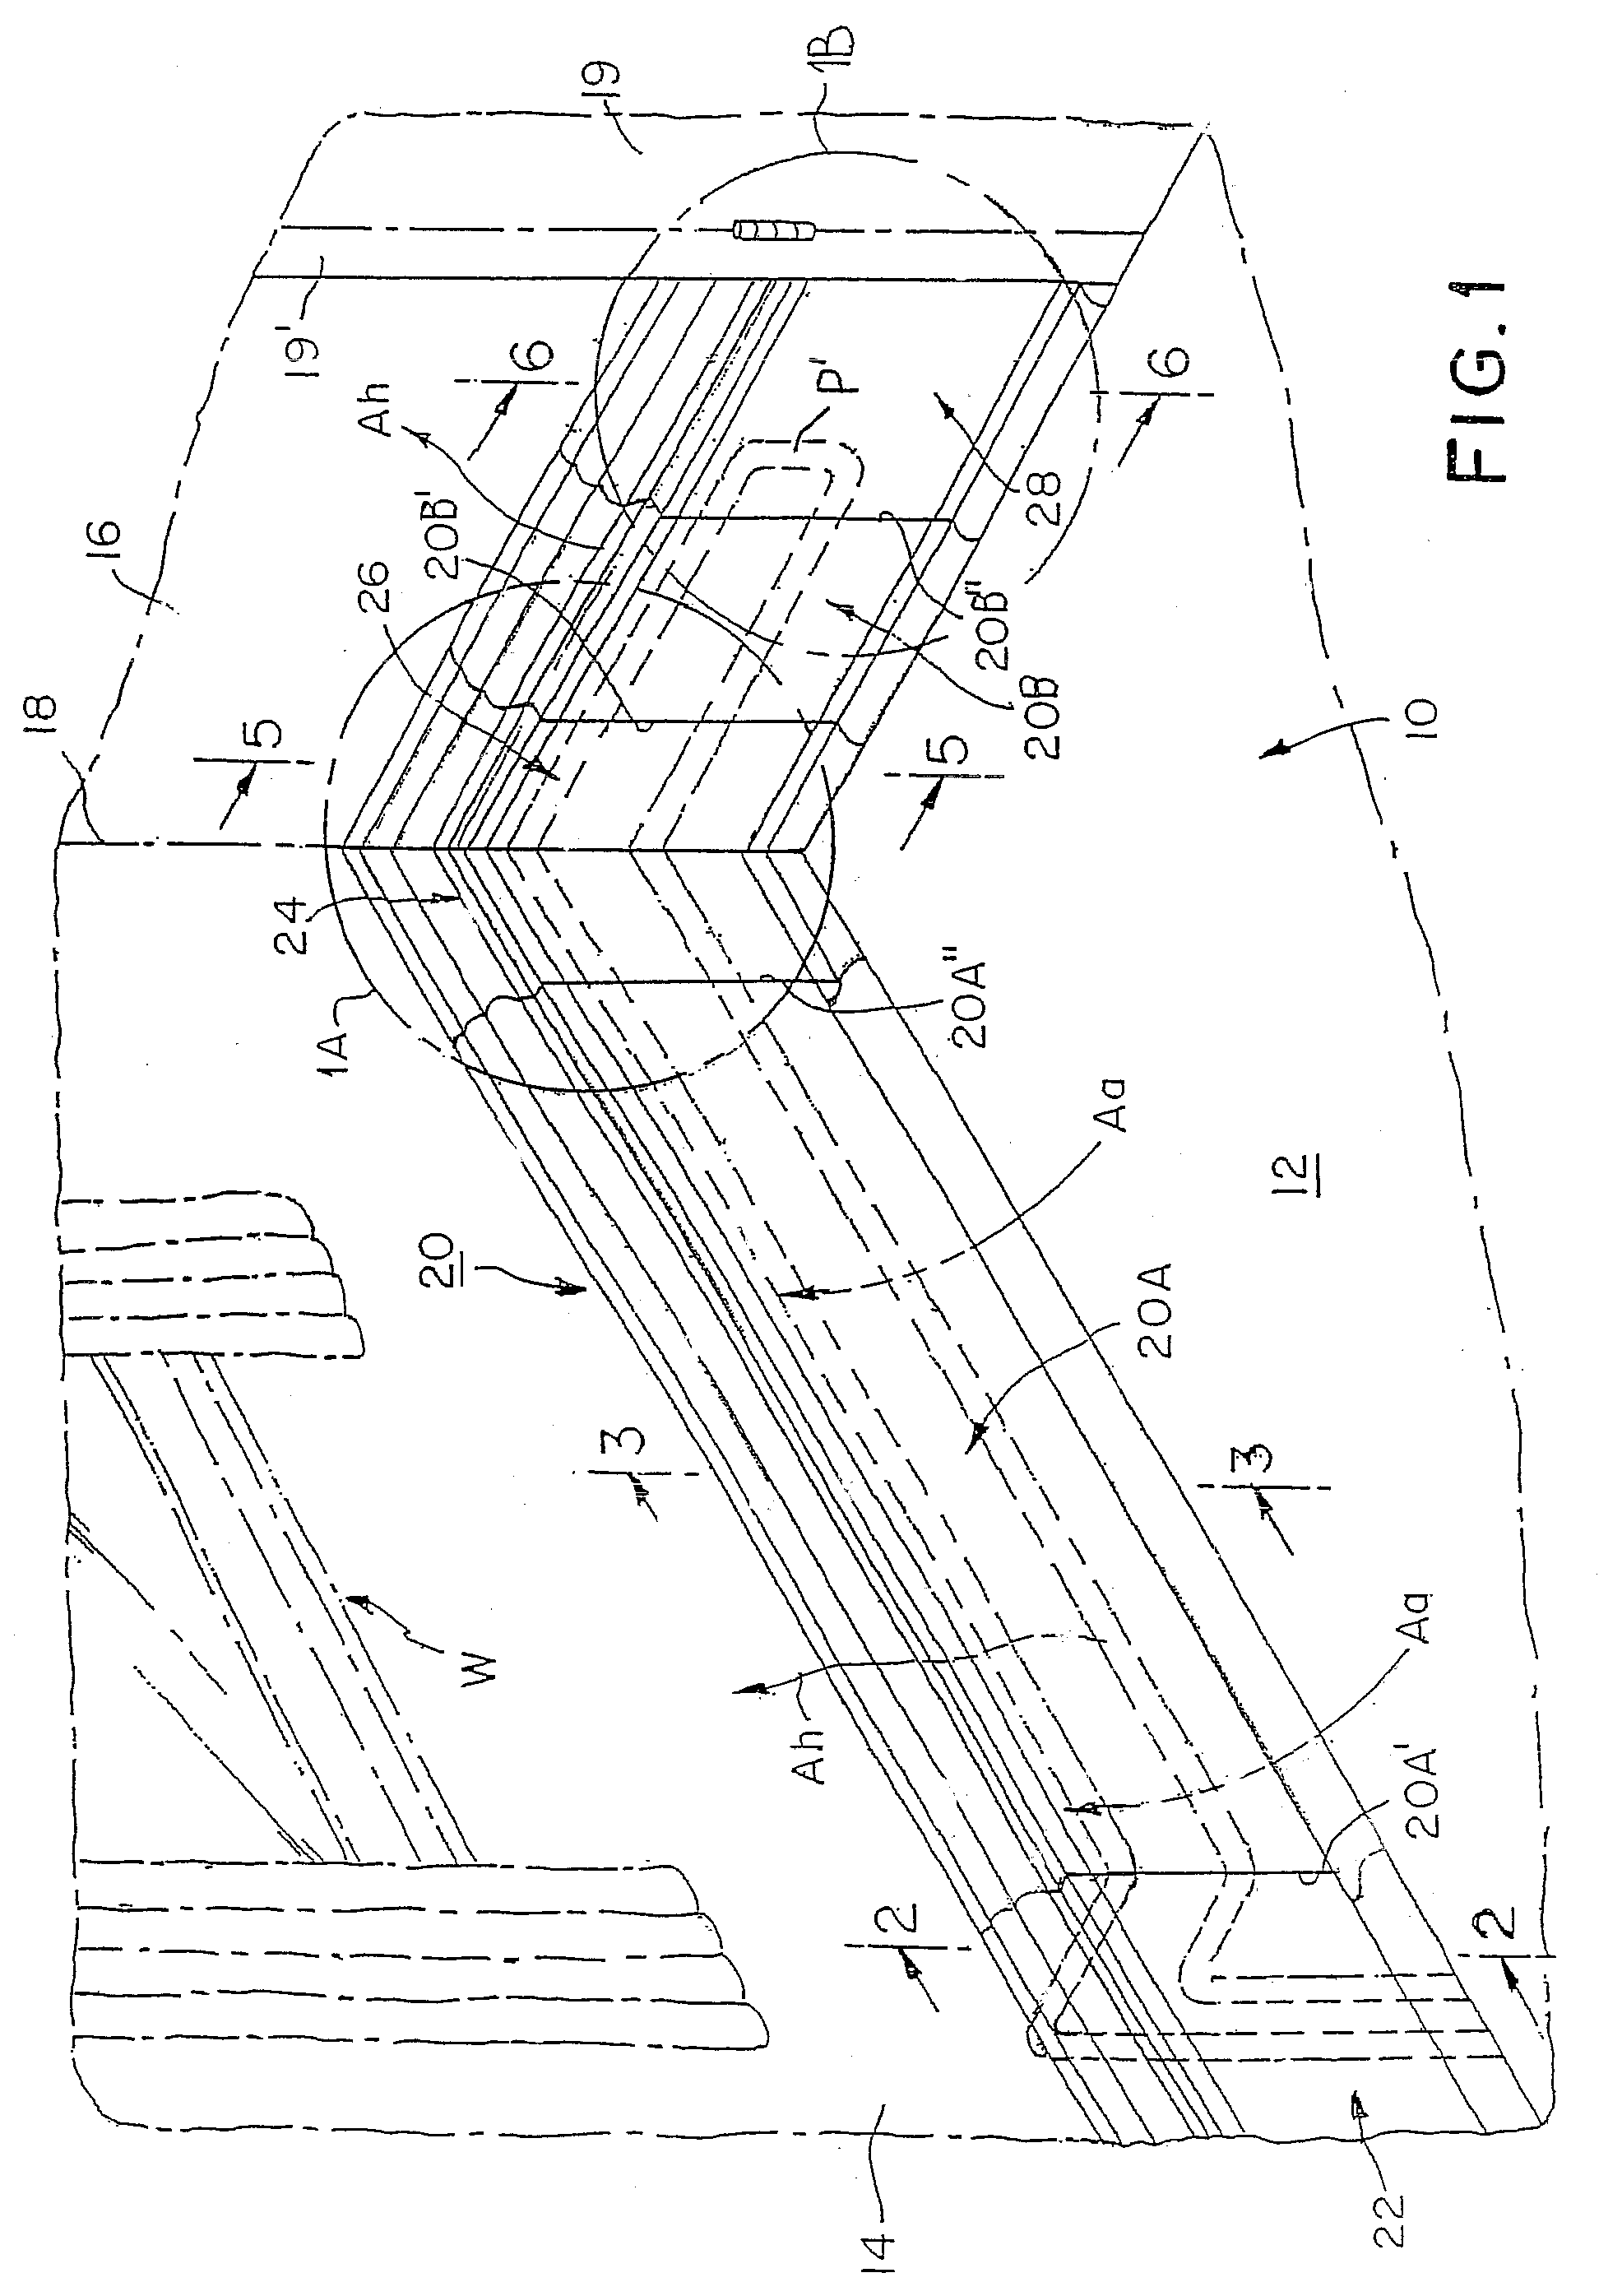 Adjustable baseboard and molding system